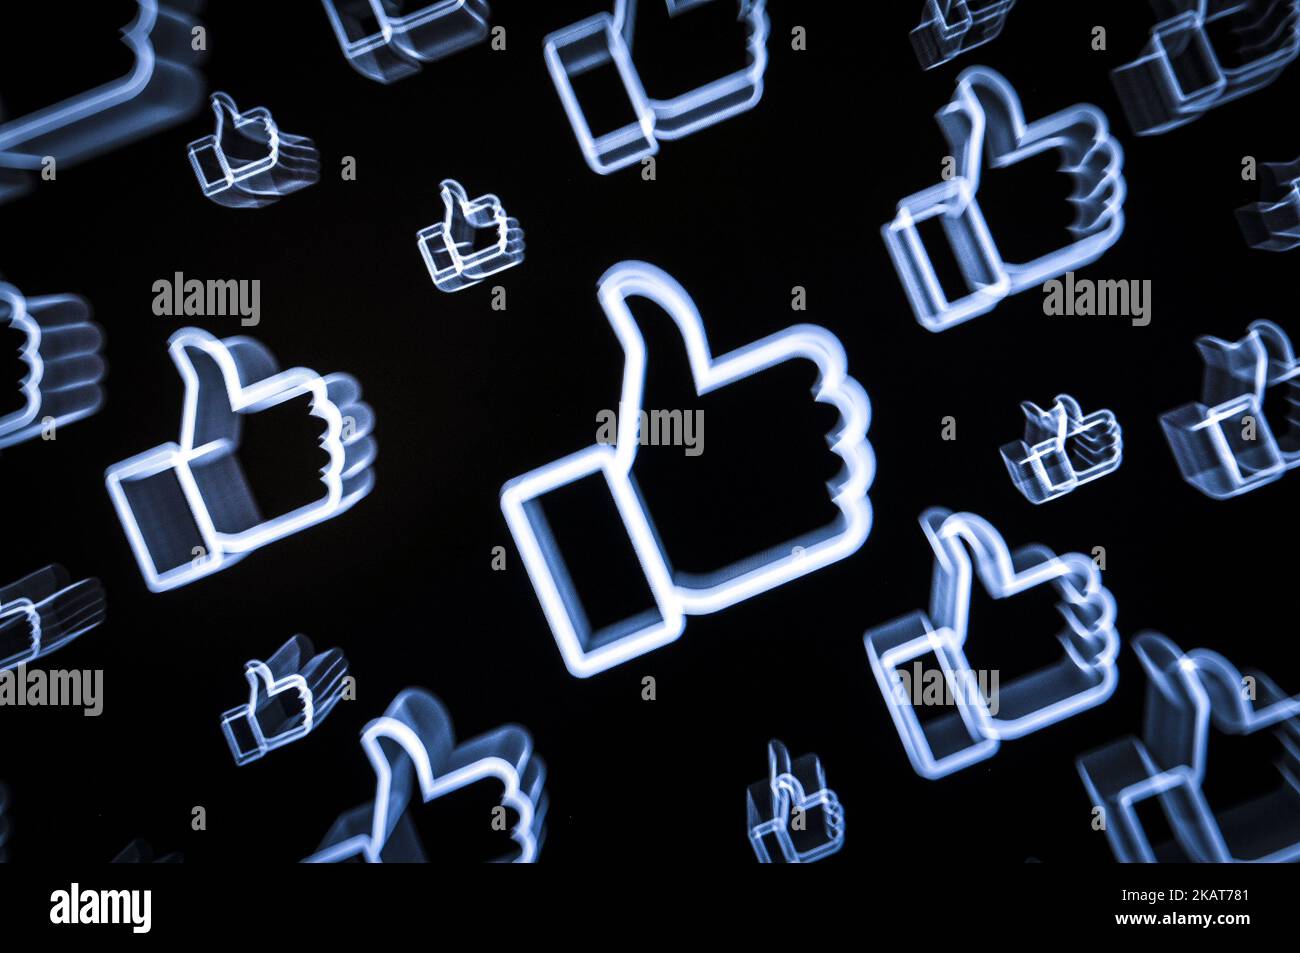 Facebook logos are seen on a computer screen in this photo illustration on November 1, 2017. Lawyers for the social media companies Facebook, Twitter and Google today have appeared in front of the Senate judiciary committee amidst accusations of influencing politics in the United Statees through Russia financed content. (Photo by Jaap Arriens/NurPhoto) Stock Photo